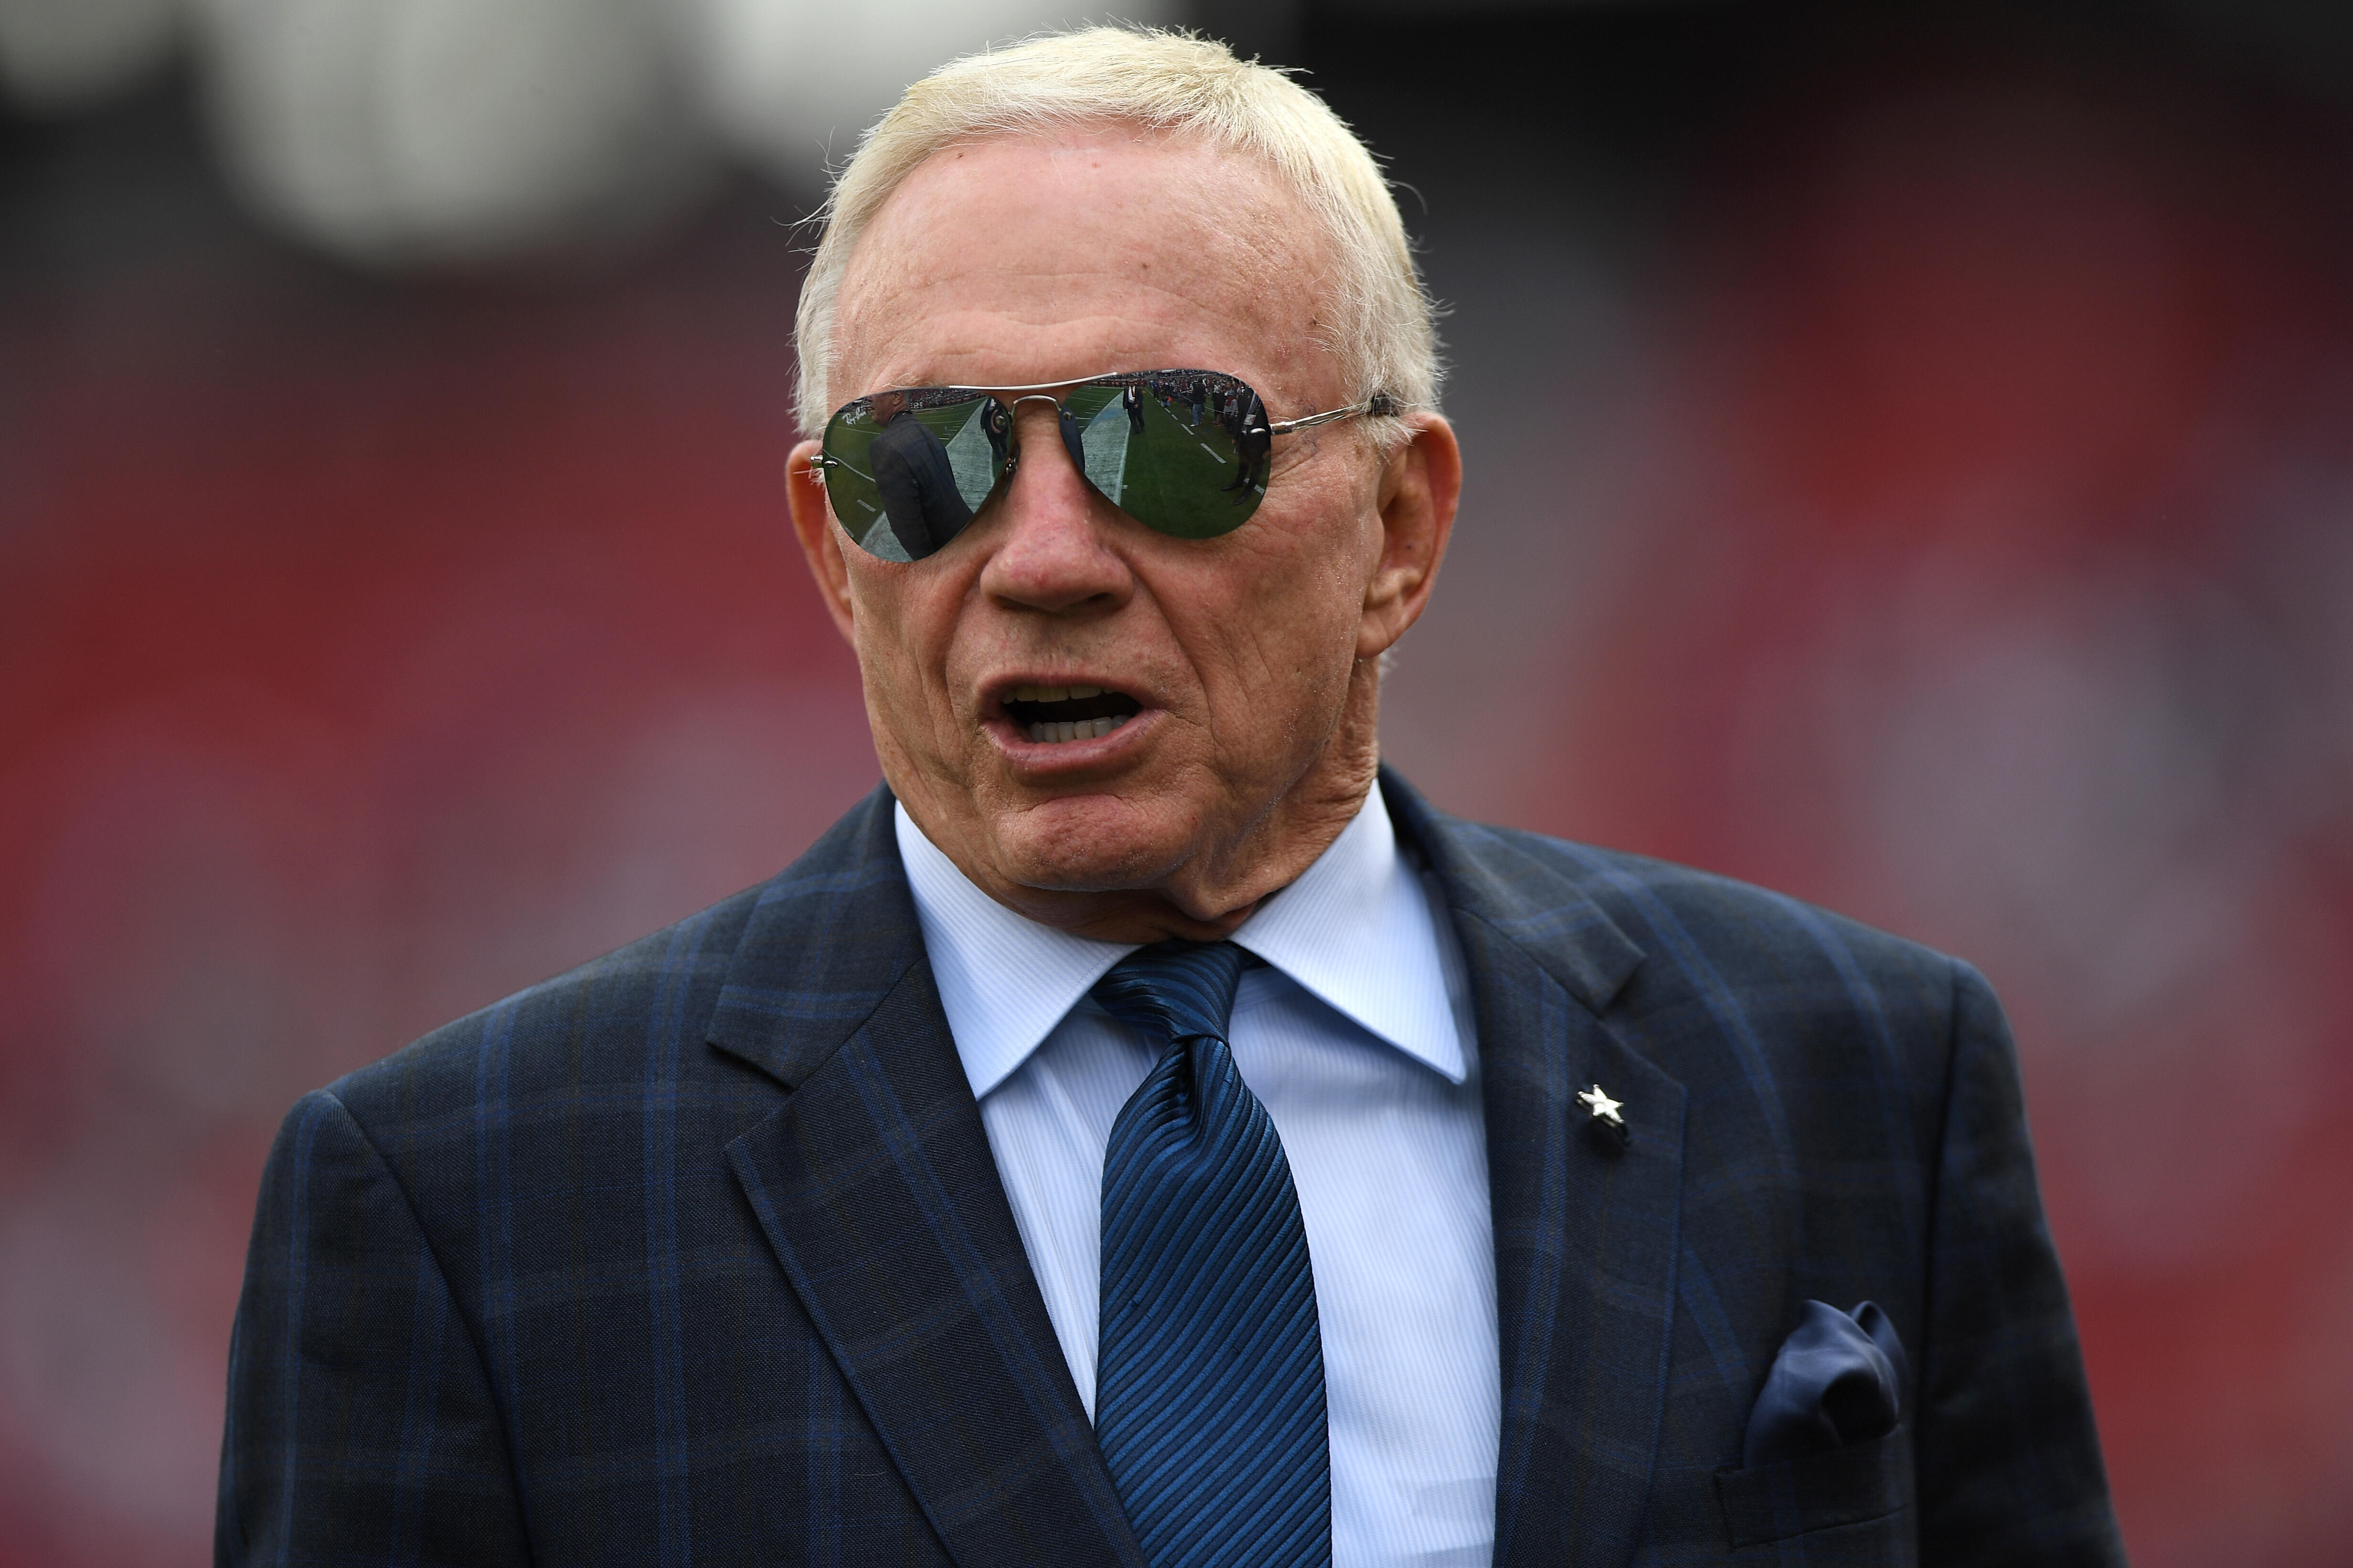 SANTA CLARA, CA - OCTOBER 02:   Dallas Cowboys owner Jerry Jones is seen on the field prior to the game against the San Francisco 49ers at Levi's Stadium on October 2, 2016 in Santa Clara, California. (Photo by Thearon W. Henderson/Getty Images)